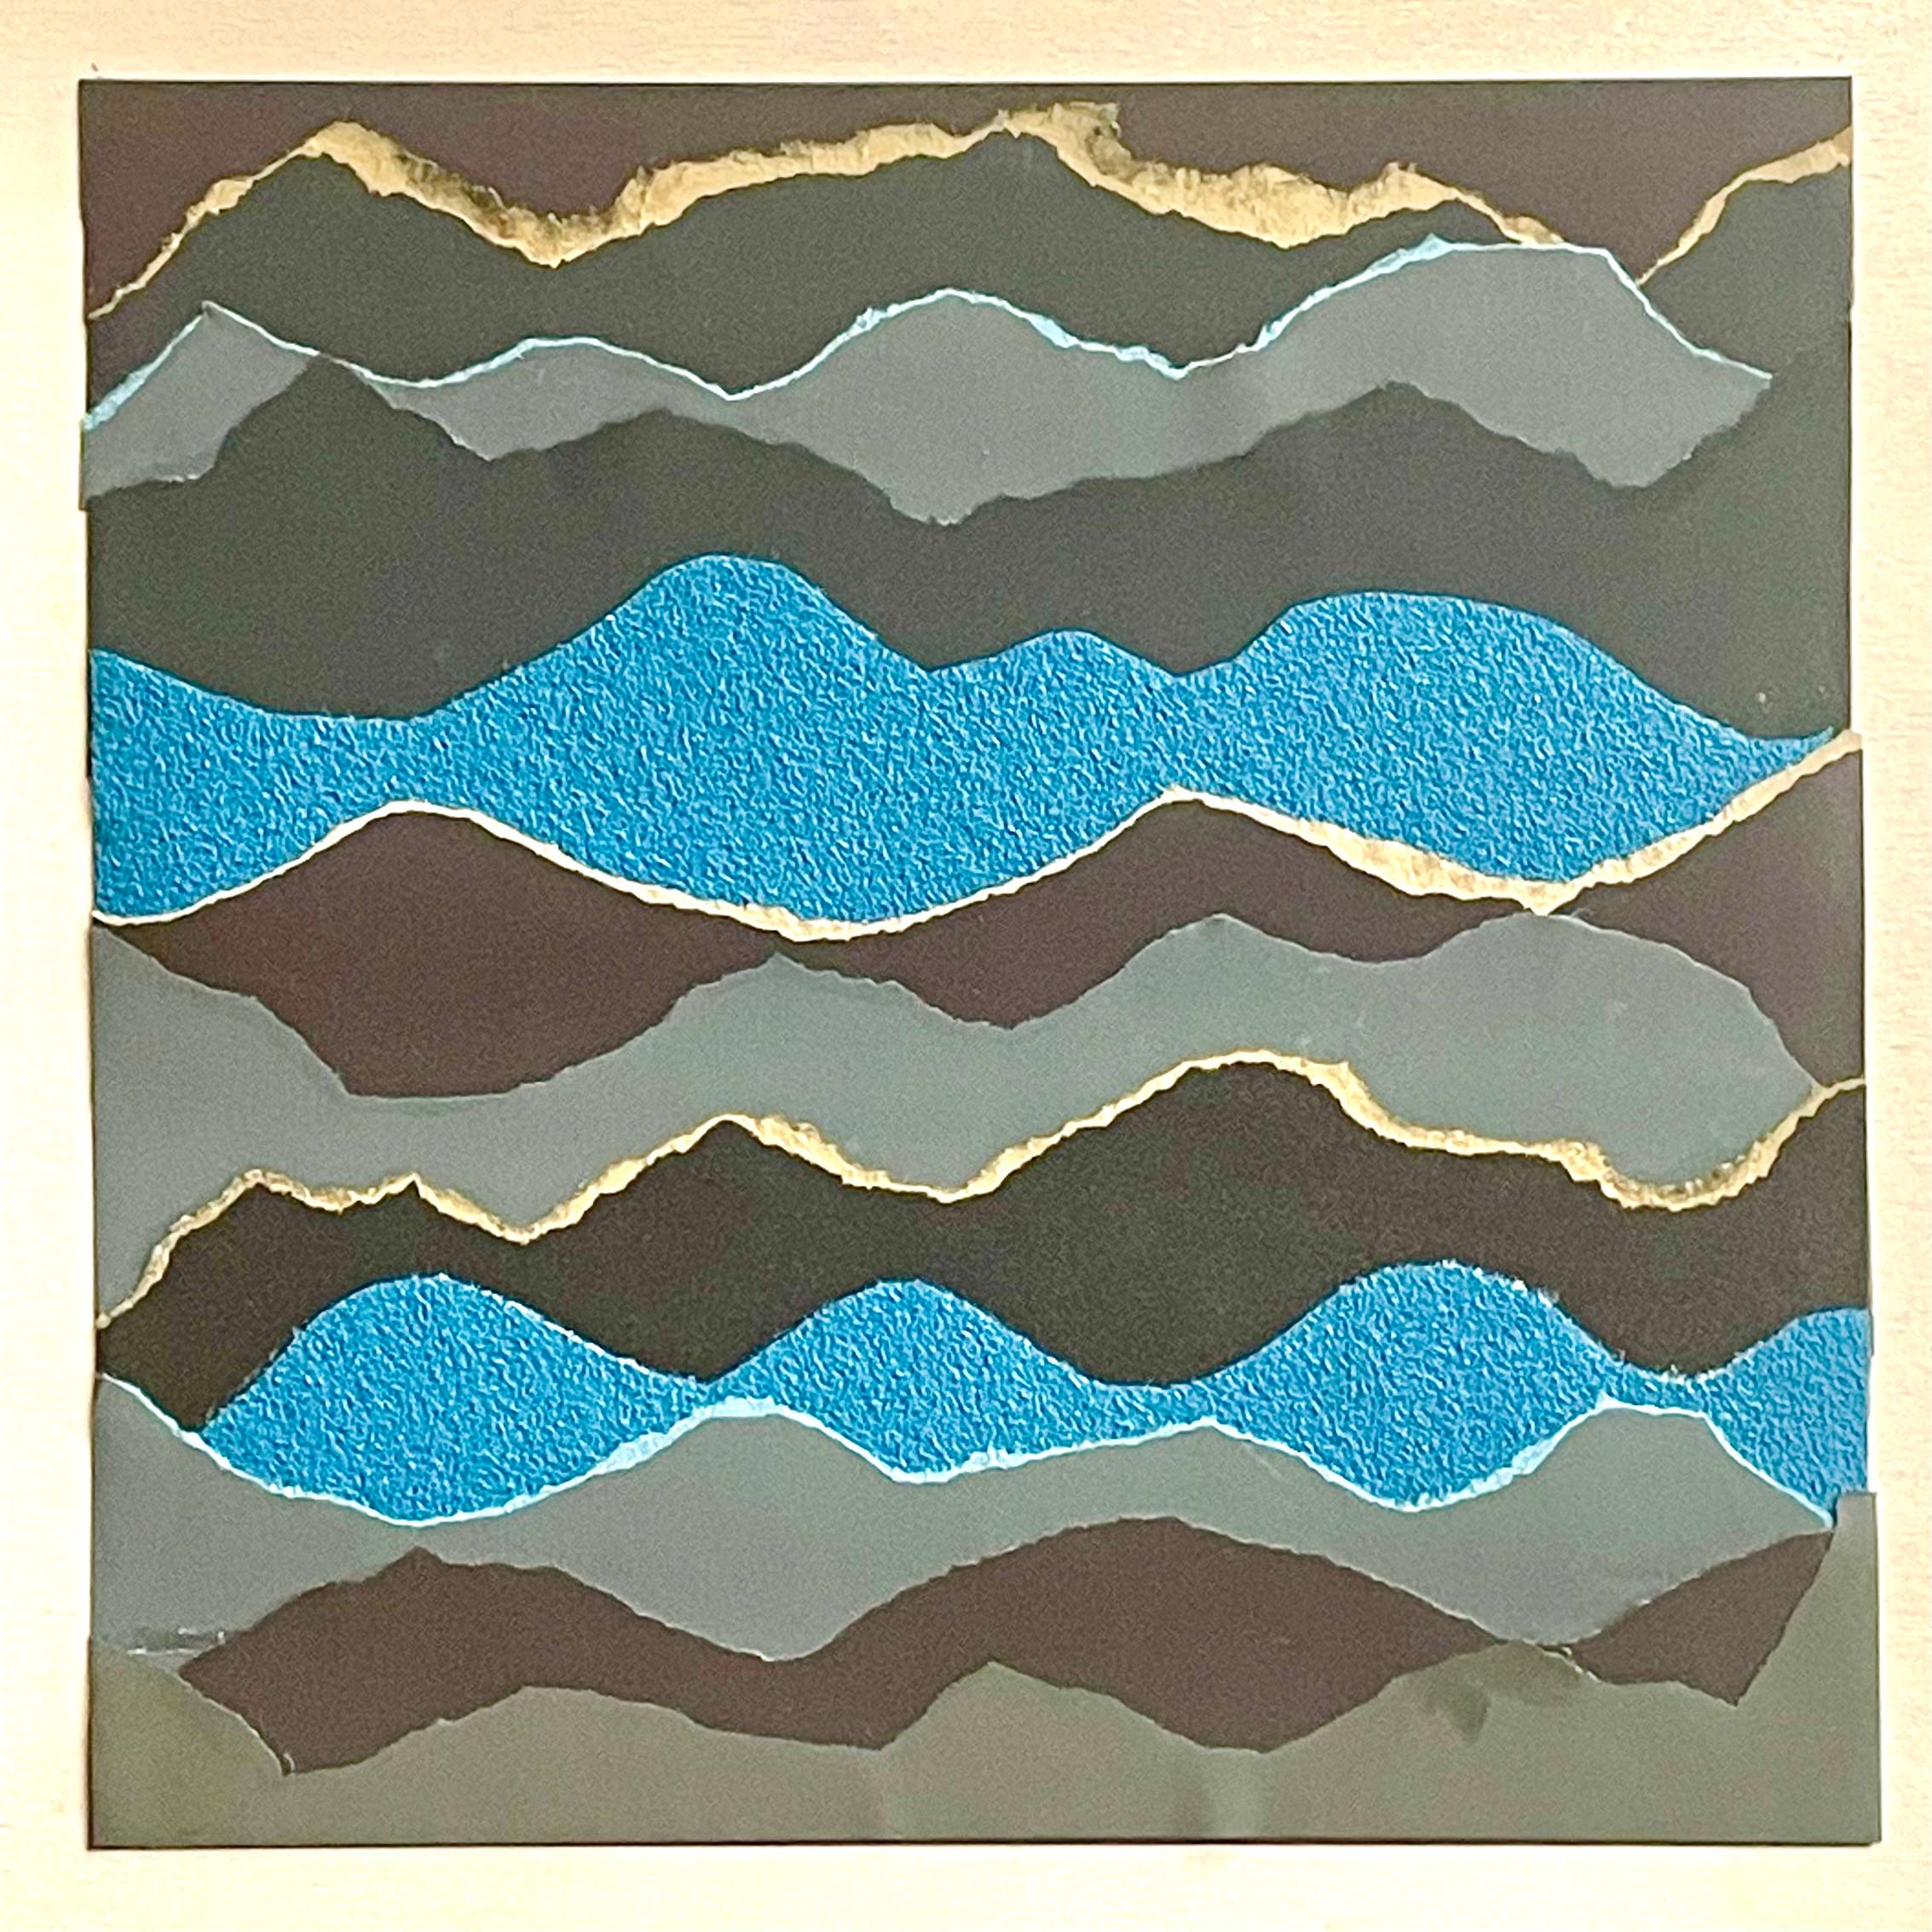 Fluctus 1  - Blue grey black abstract seascape paper collage on wood board